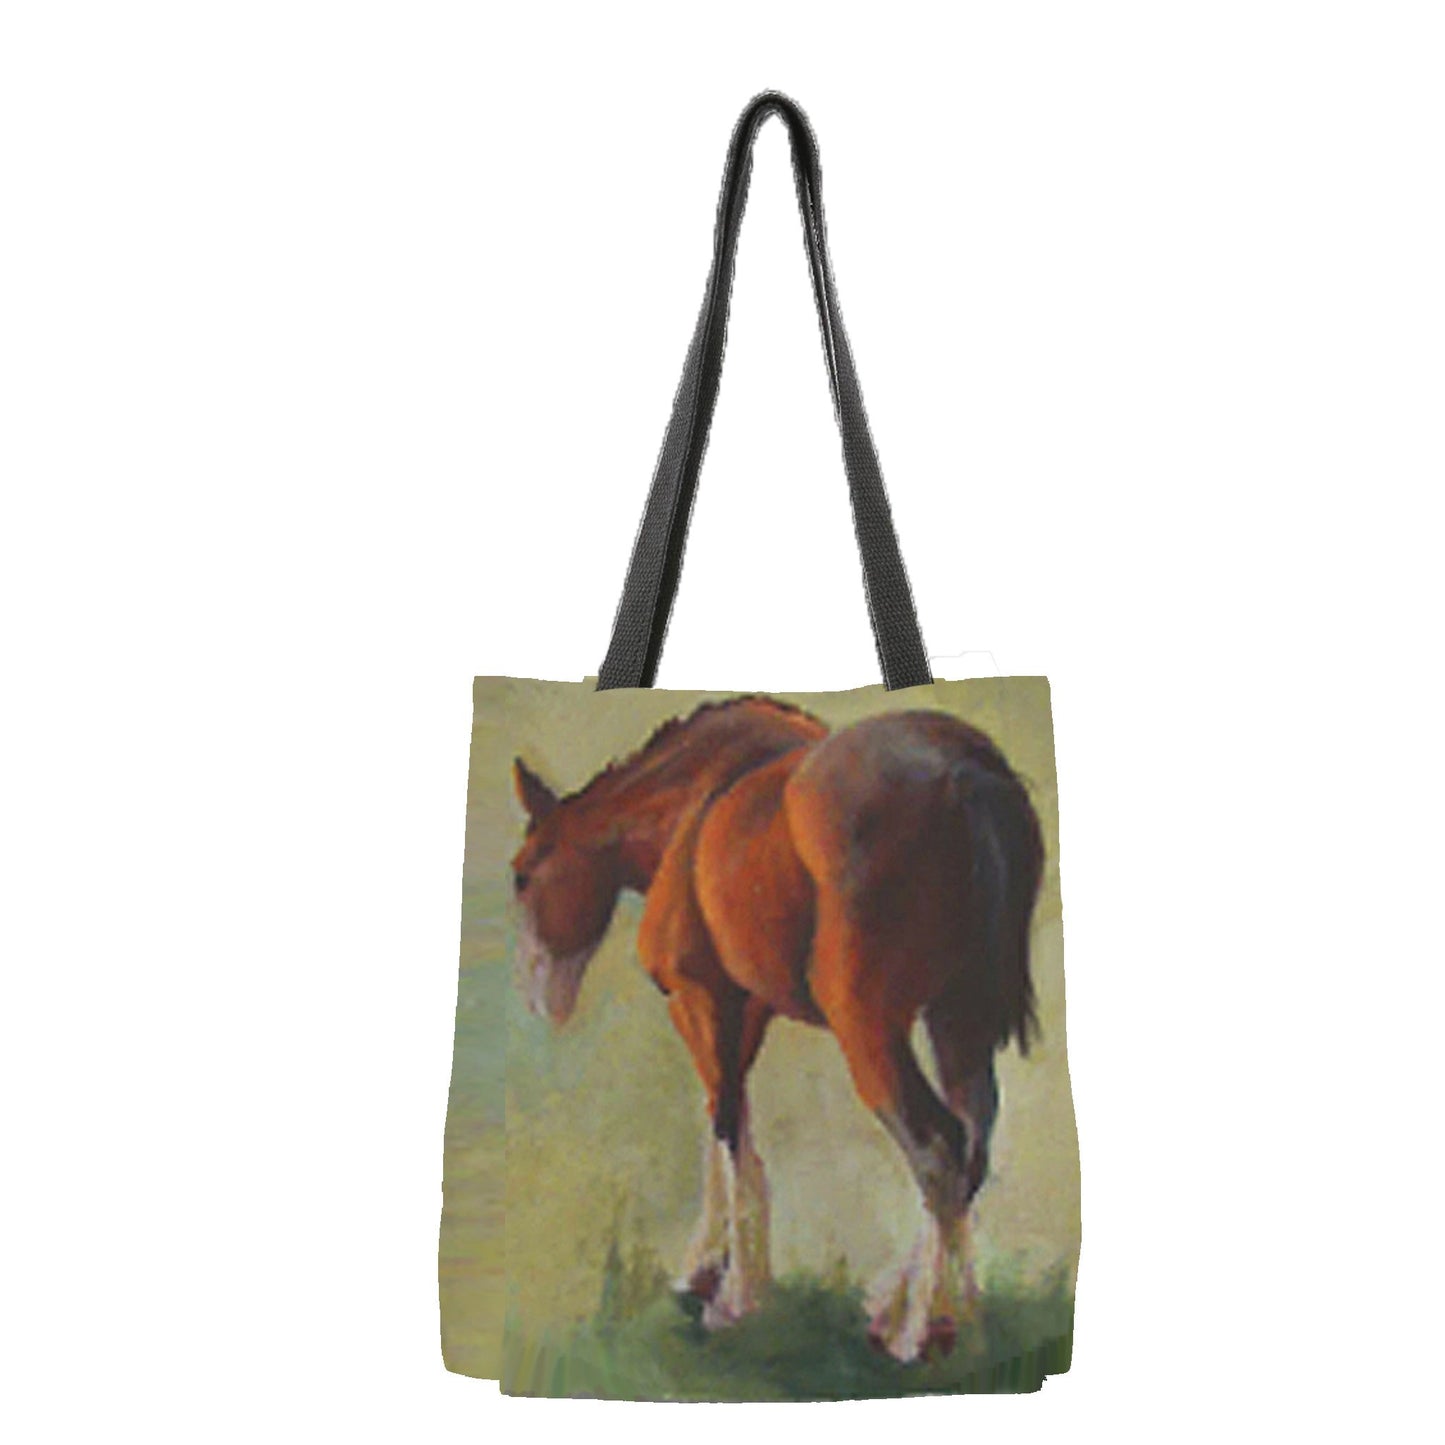 Charlie the horse is on this tote bag.  A proud stallion, he now visits the pasture every day